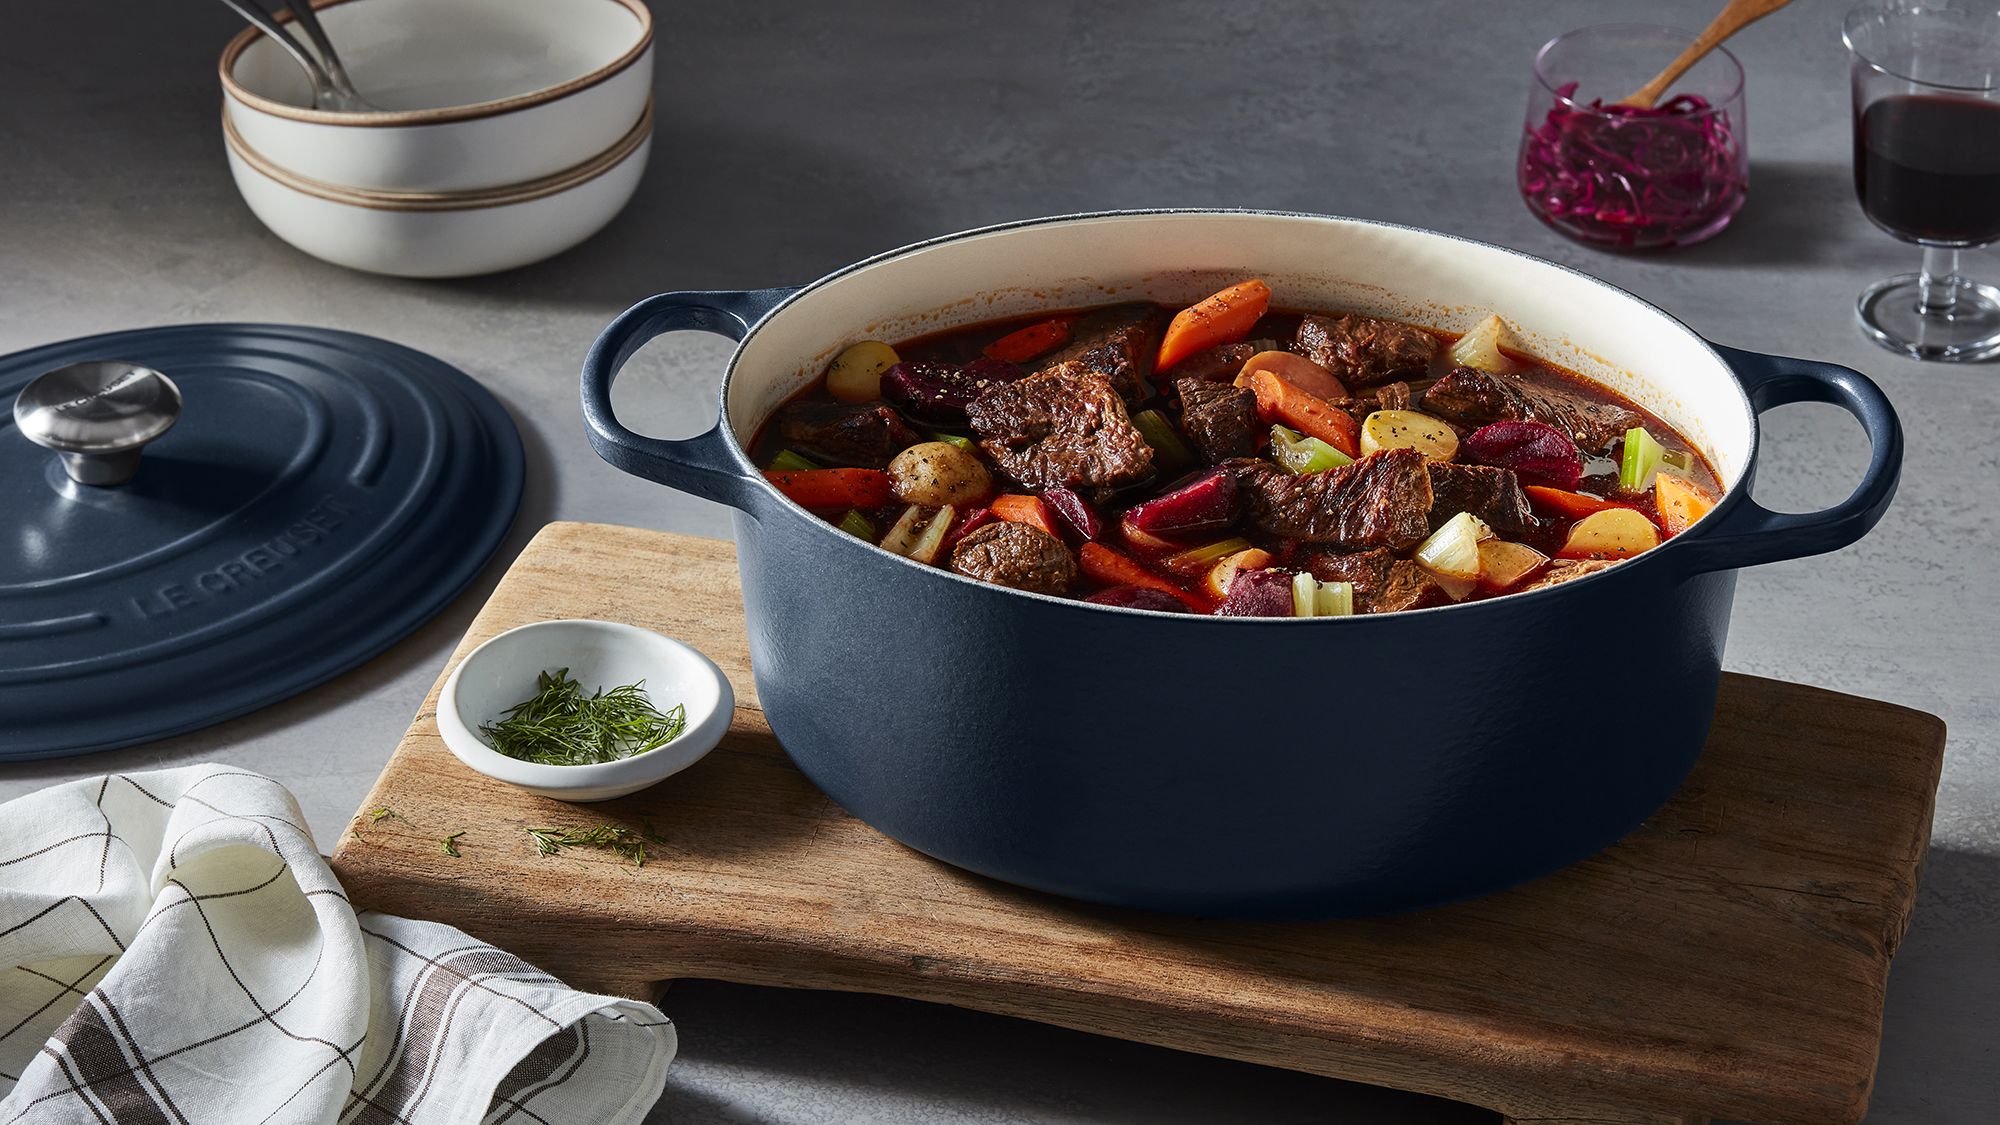 Le Creuset - GIVEAWAY! ✨ We've partnered with America's Test